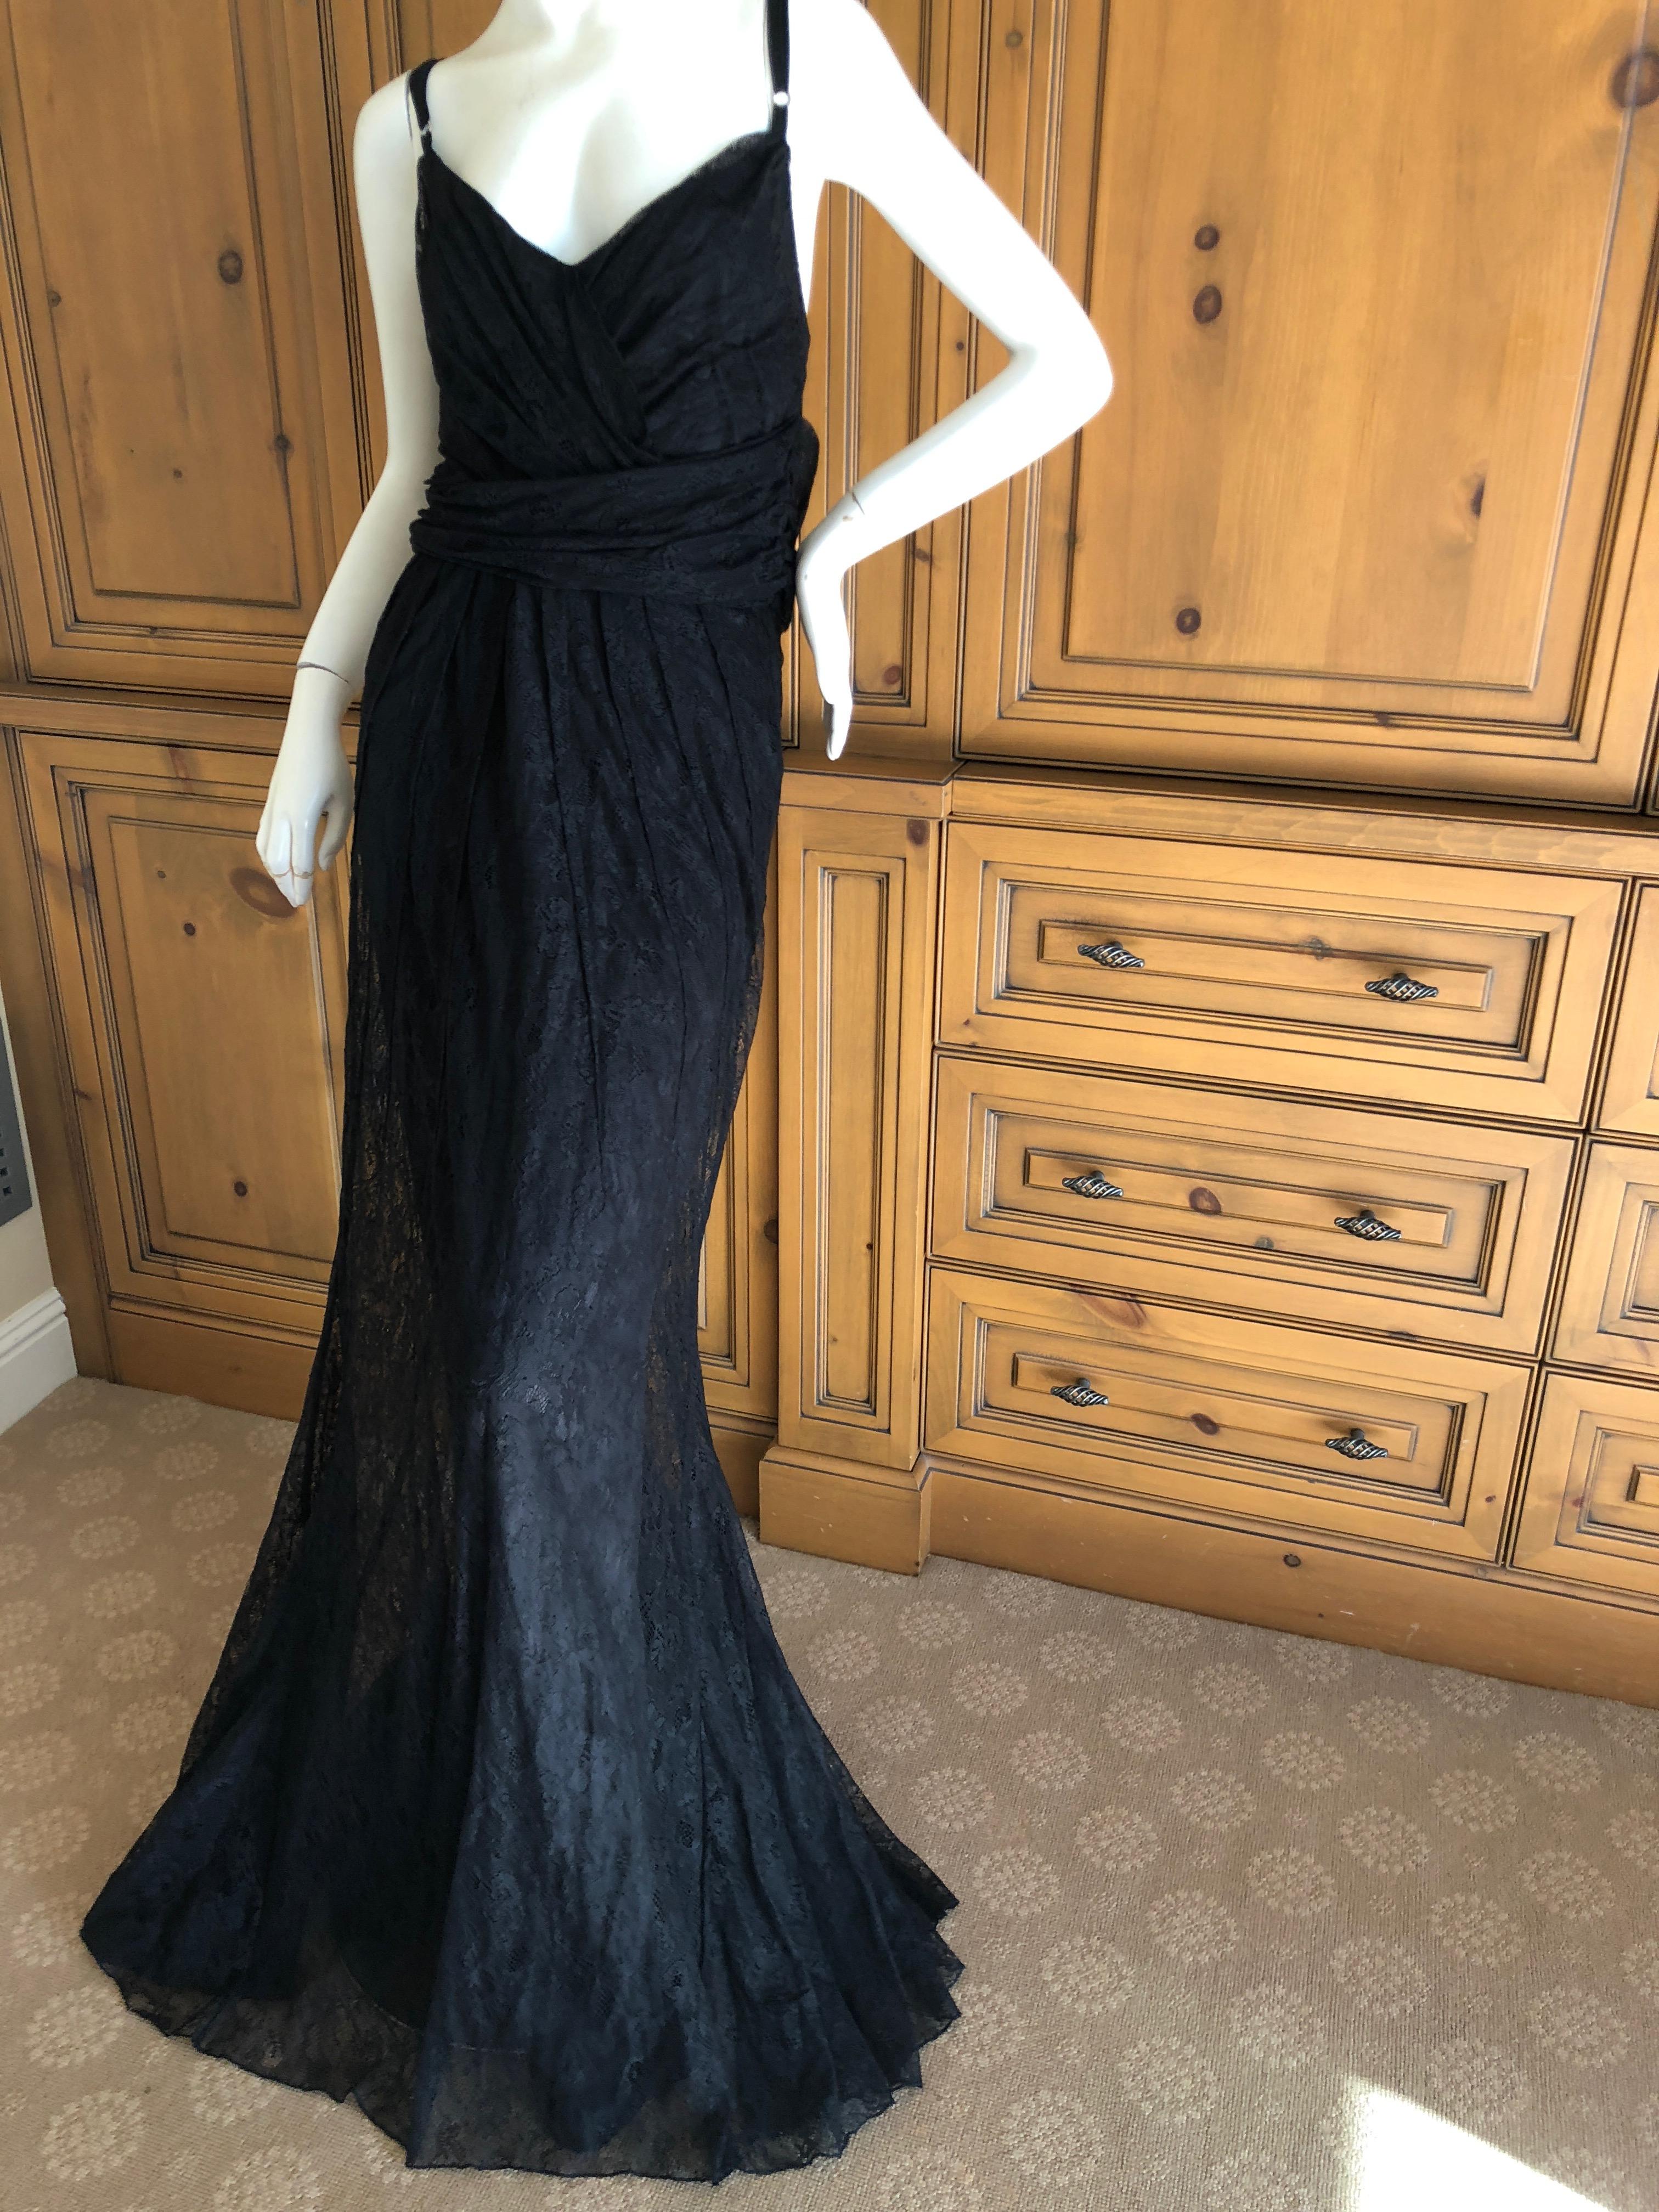 D&G Dolce & Gabbana Sheer Black Lace Vintage Evening Dress with Train For Sale 3